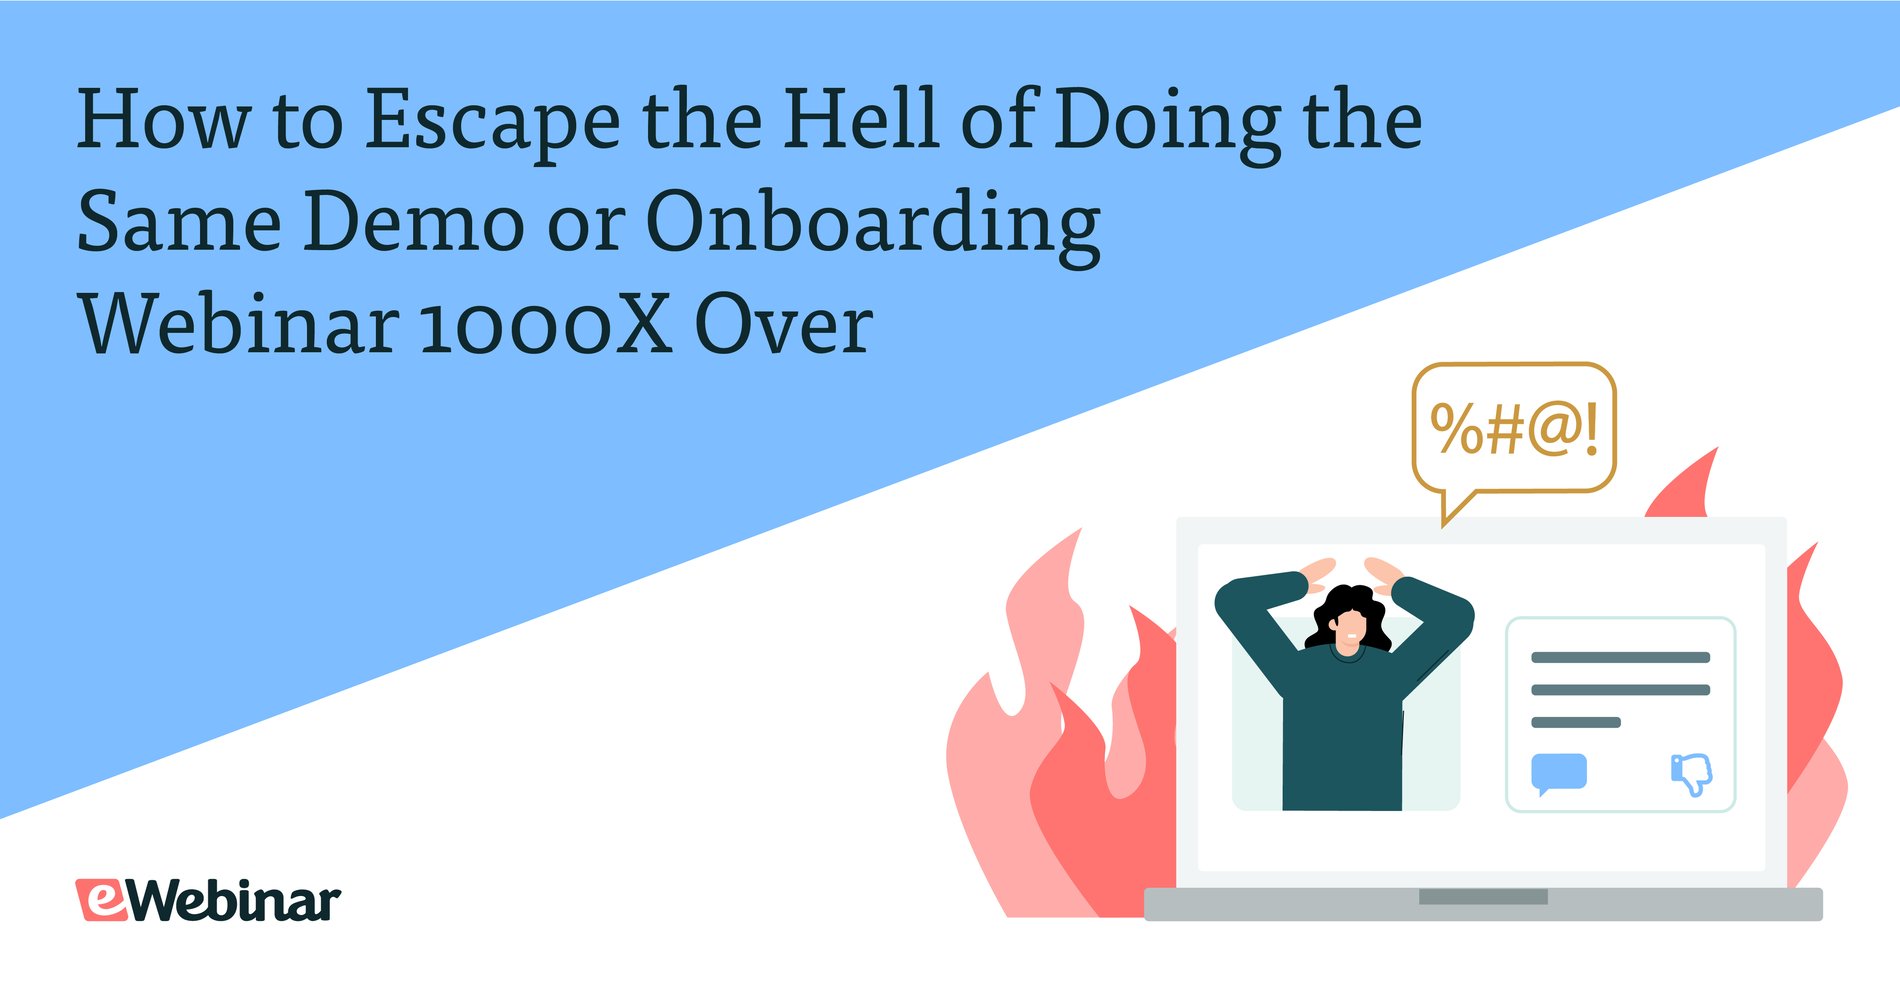 How to Escape the Hell of Doing the Same Demo or Onboarding Webinar 1000X Over